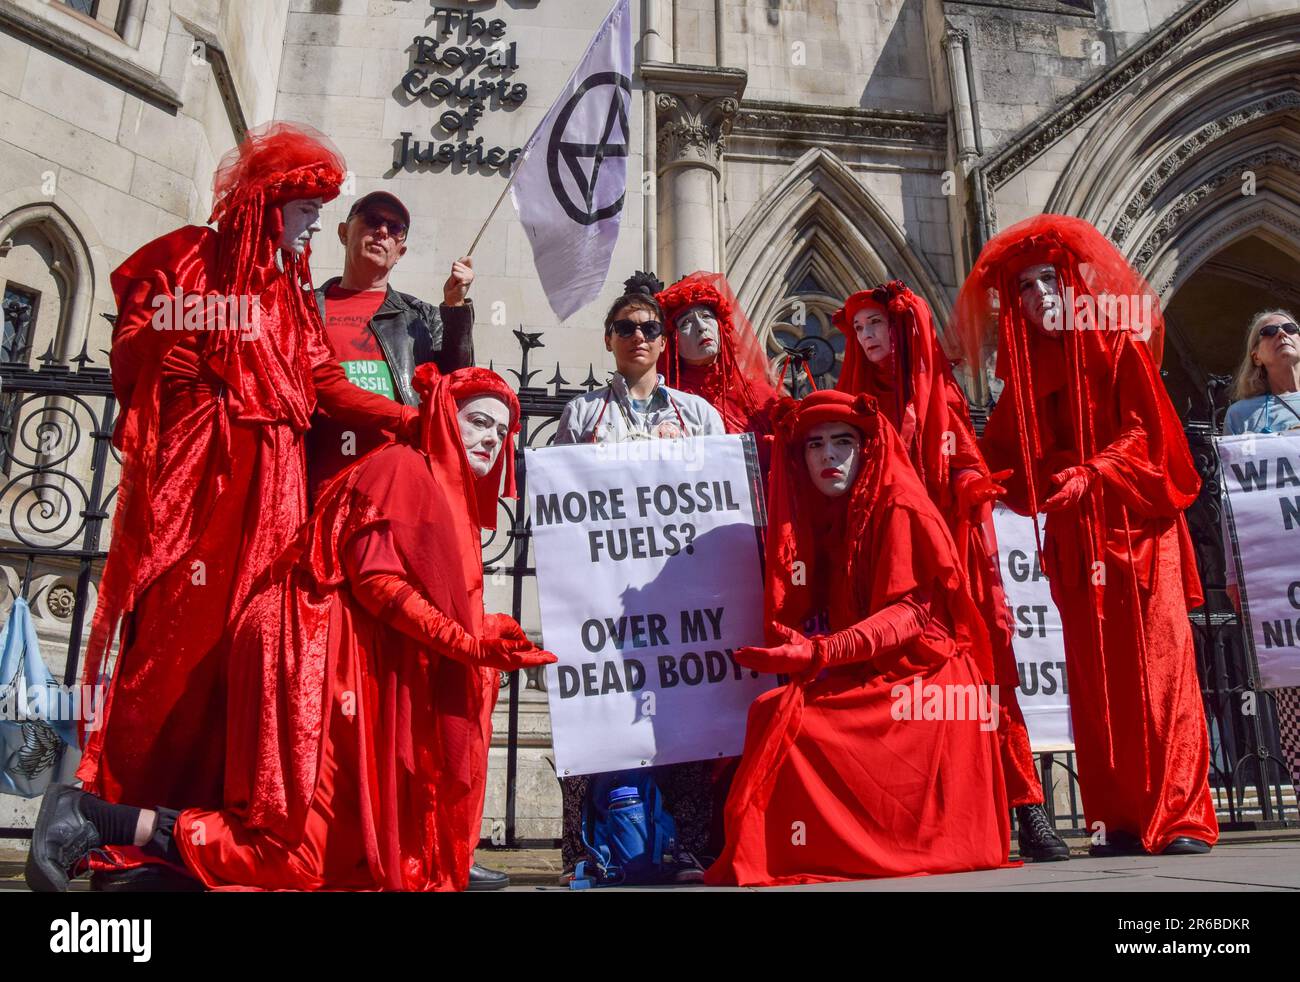 Extinction Rebellion protesters wearing red costumes, known as the Red Rebel Brigade, perform during the demonstration. Climate protesters gathered outside the Royal Courts of Justice during the judicial review of the planning permission for UK Oil And Gas to explore for fossil fuels near the village of Dunsfold. (Photo by Vuk Valcic / SOPA Images/Sipa USA) Stock Photo